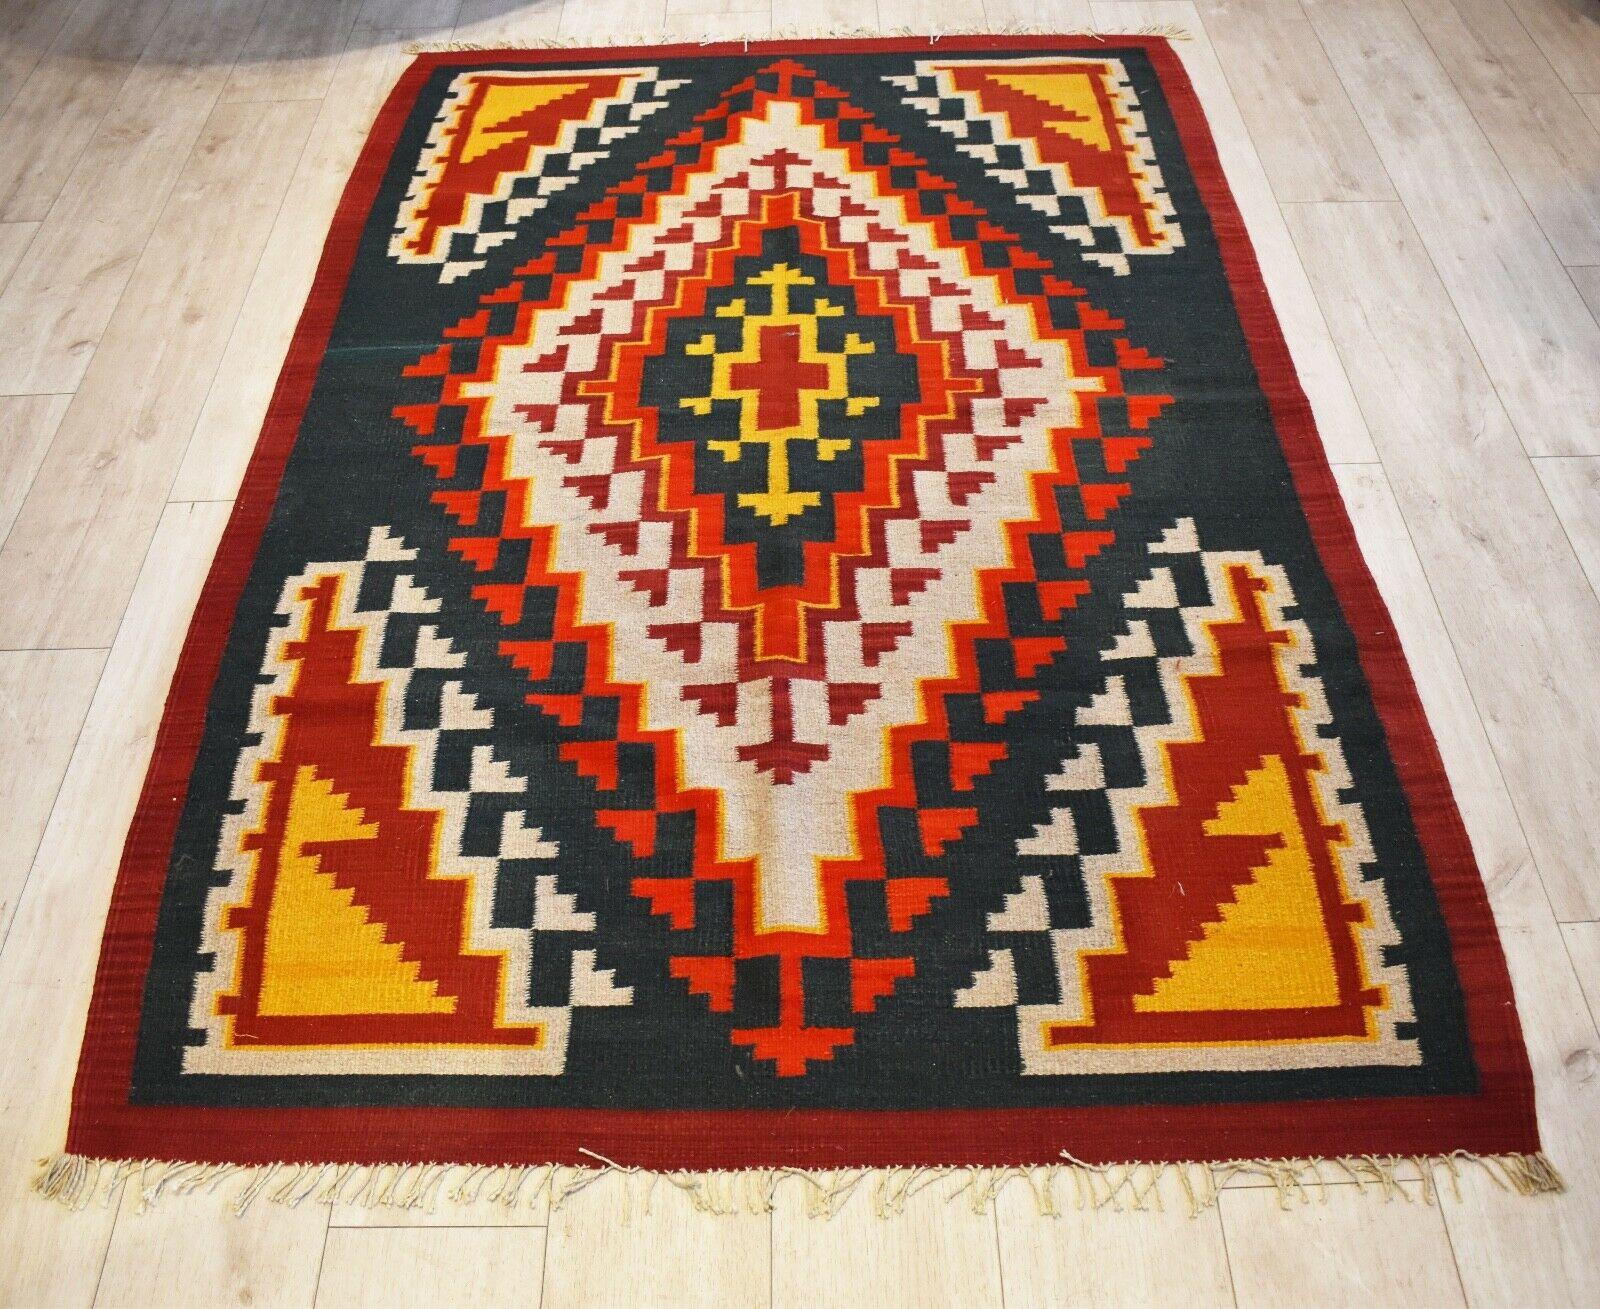 Very rare and unusual beautiful handwoven vintage Kilim runner
with patterns in shades of natural dyed red, orange, charcoal black, and yellow colors
Handwoven with natural dyes.
Has a lovely aged patina & nice quality.